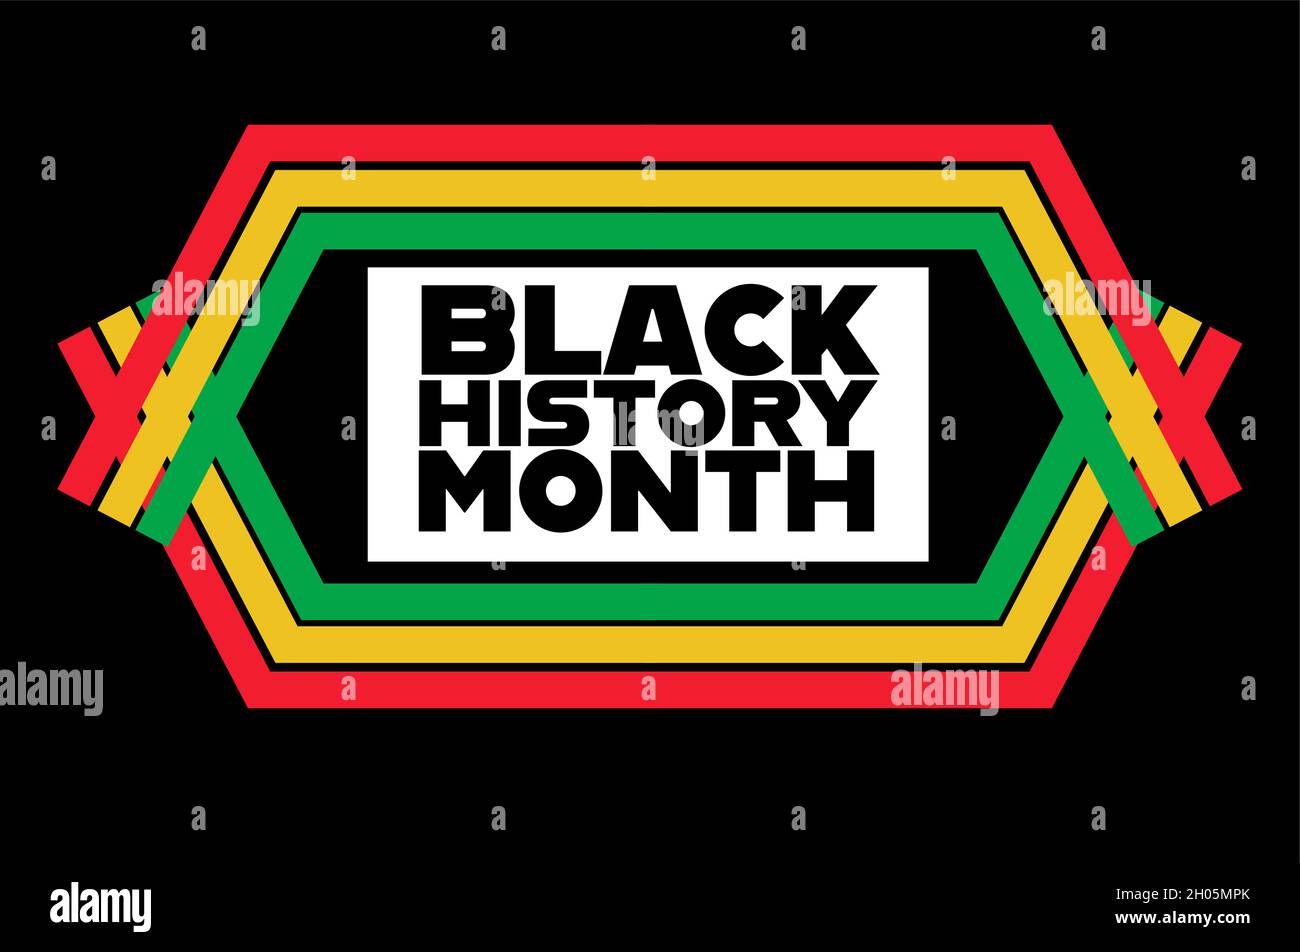 Black history month vector illustration design graphic on a black background Stock Vector